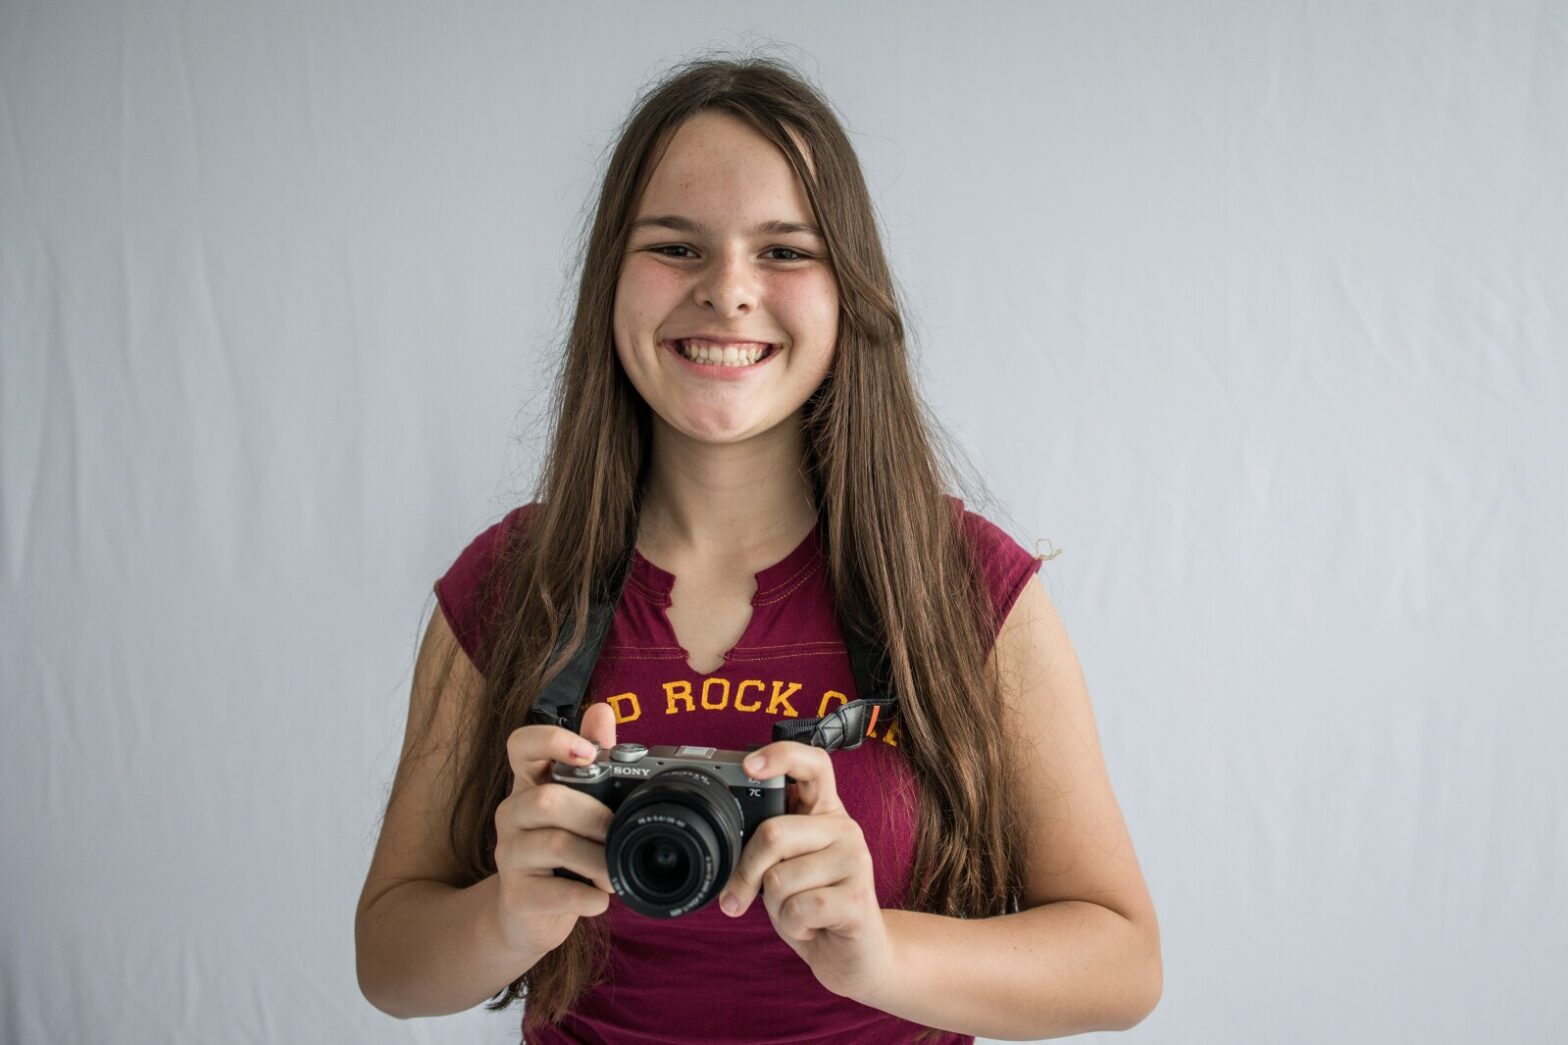 Picture perfect: Rochester student receives national photography award - Post Bulletin